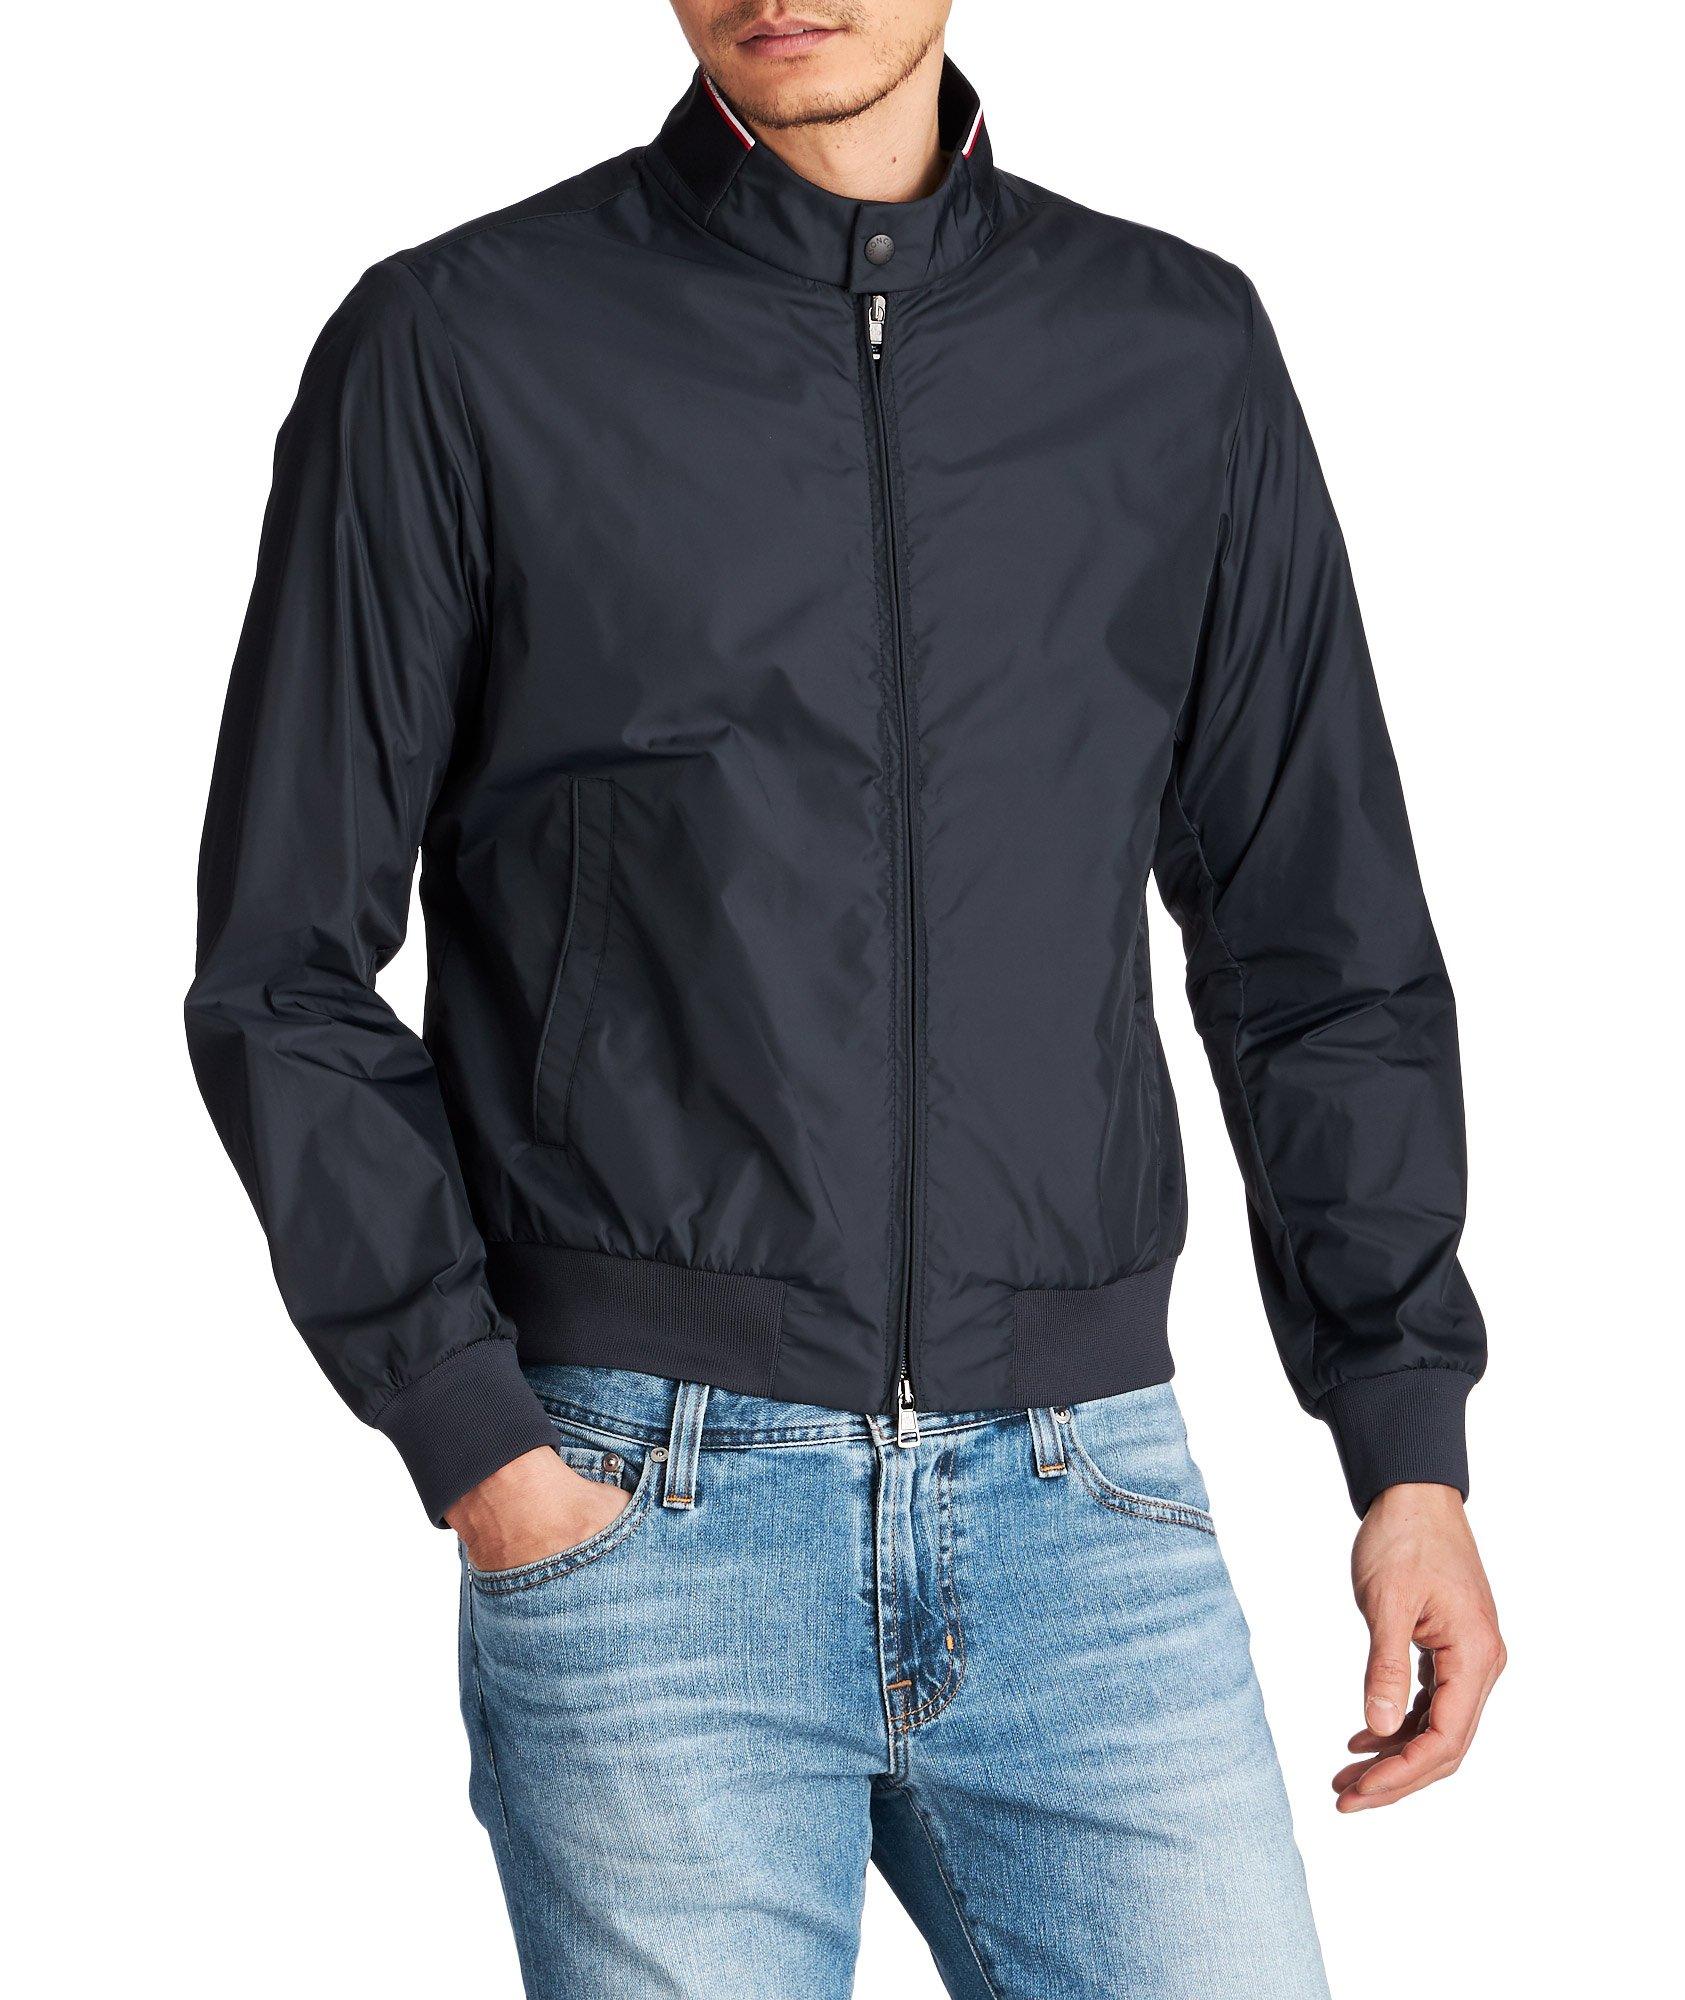 Reppe Water-Resistant Bomber image 0